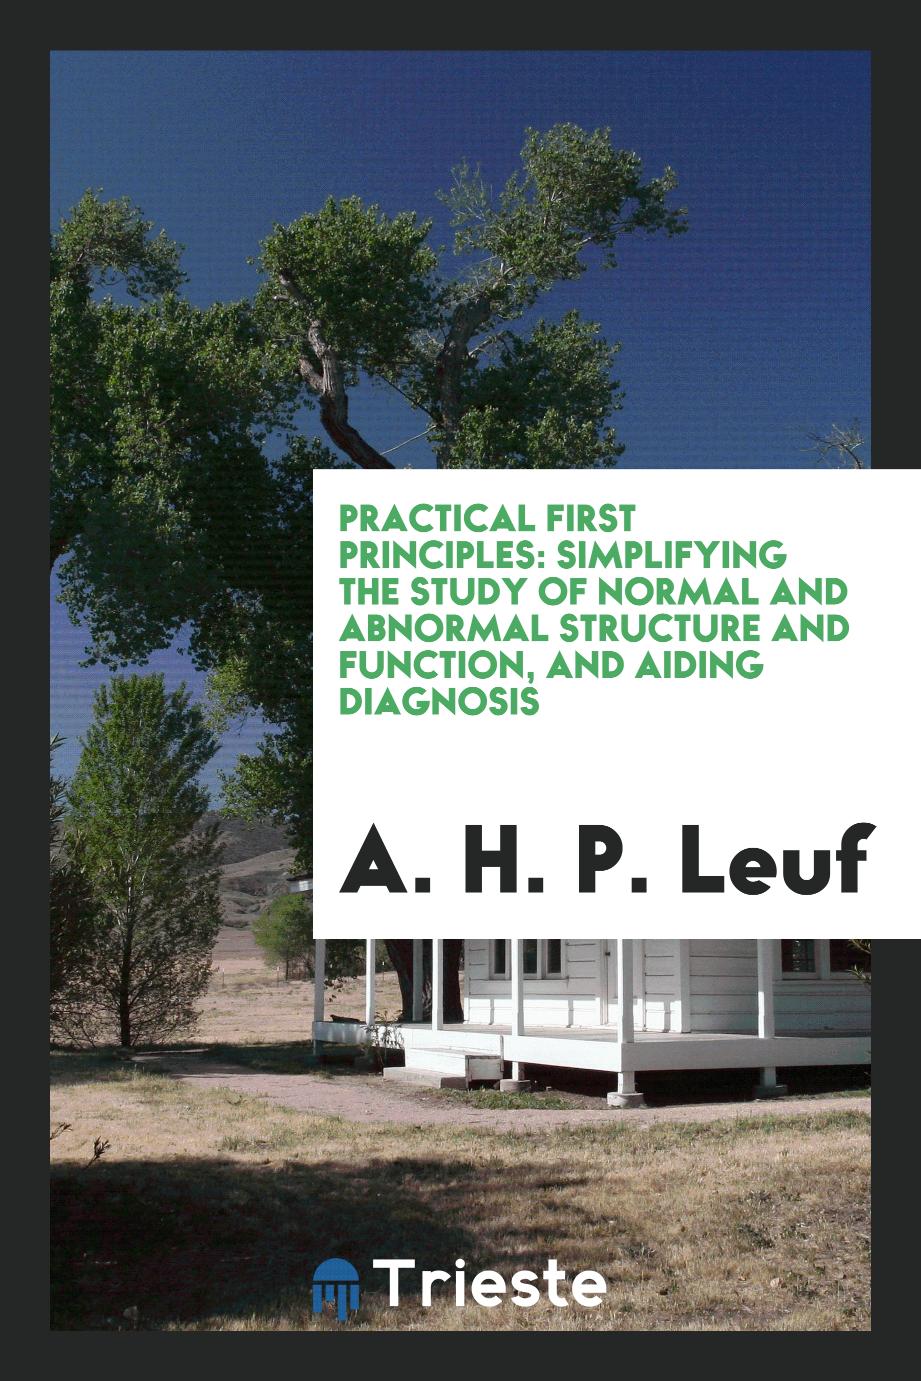 Practical First Principles: Simplifying the Study of Normal and Abnormal Structure and Function, and Aiding Diagnosis